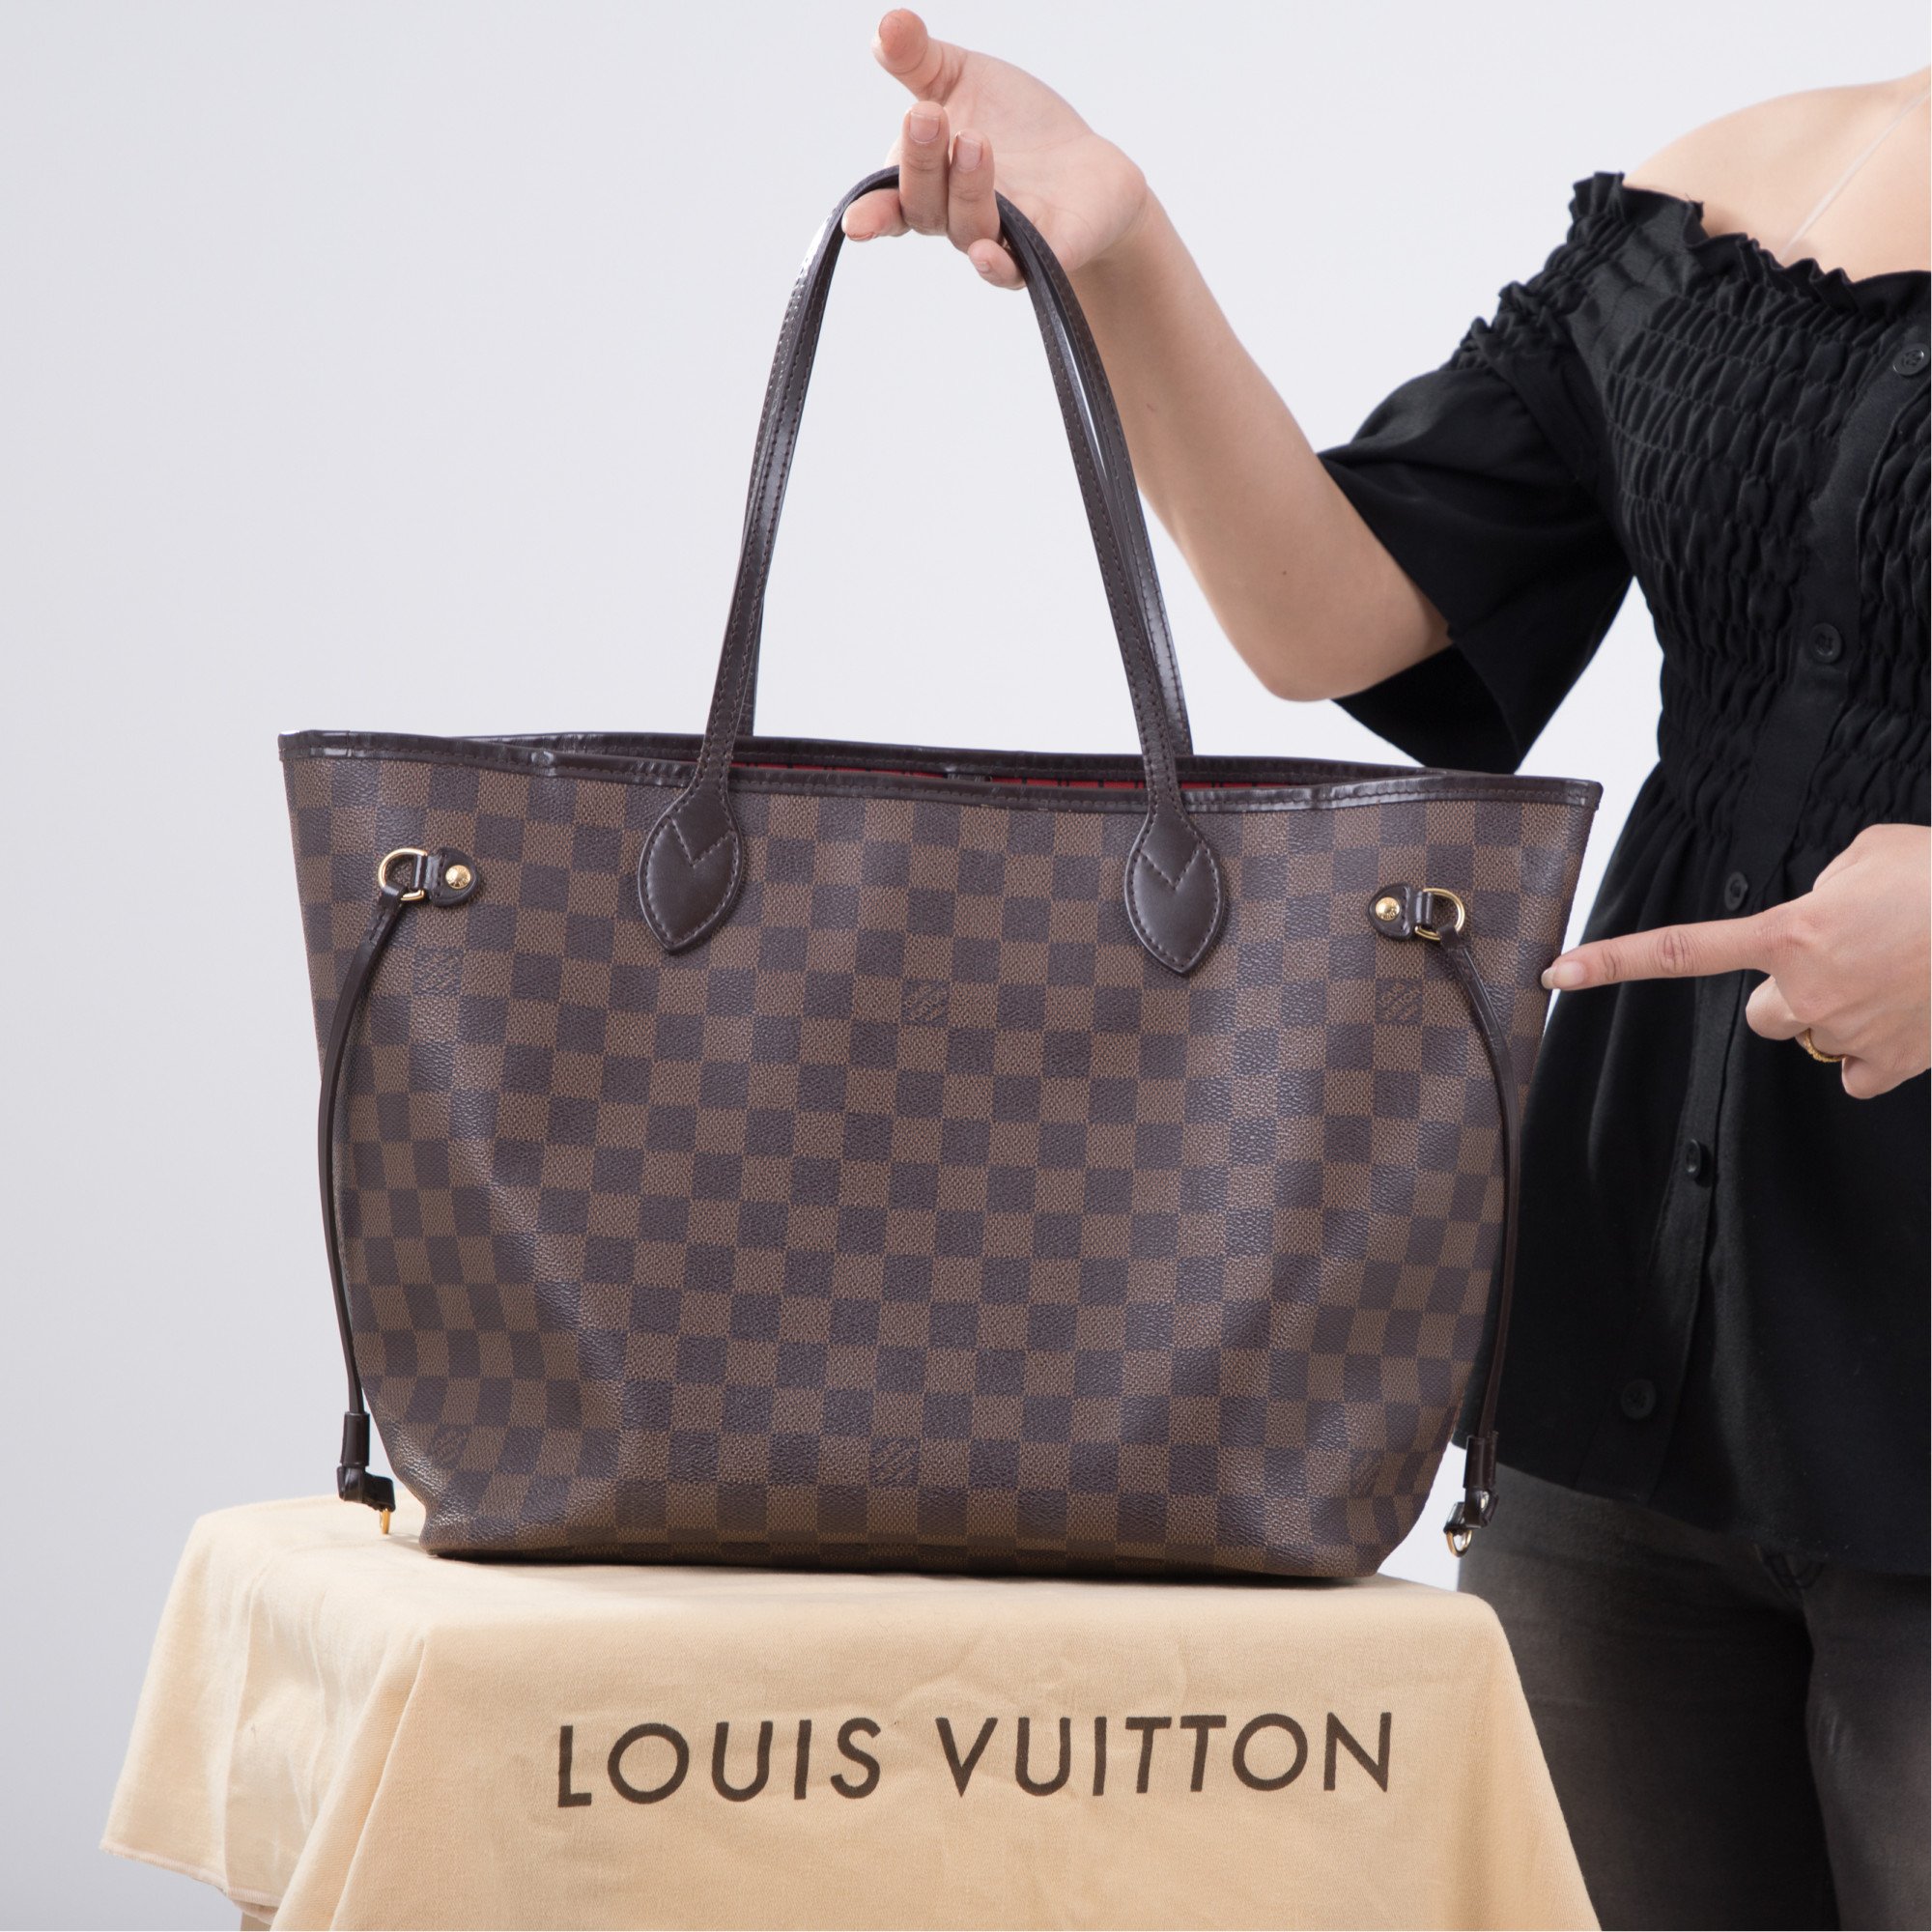 RankingRoyals - Louis Vuitton Moet Hennessy(LVMH) is the most valuable  luxury brand in the world, with a brand value of about 75.7 billion U.S.  dollars in 2021. Moet Hennessy Louis Vuitton, referred